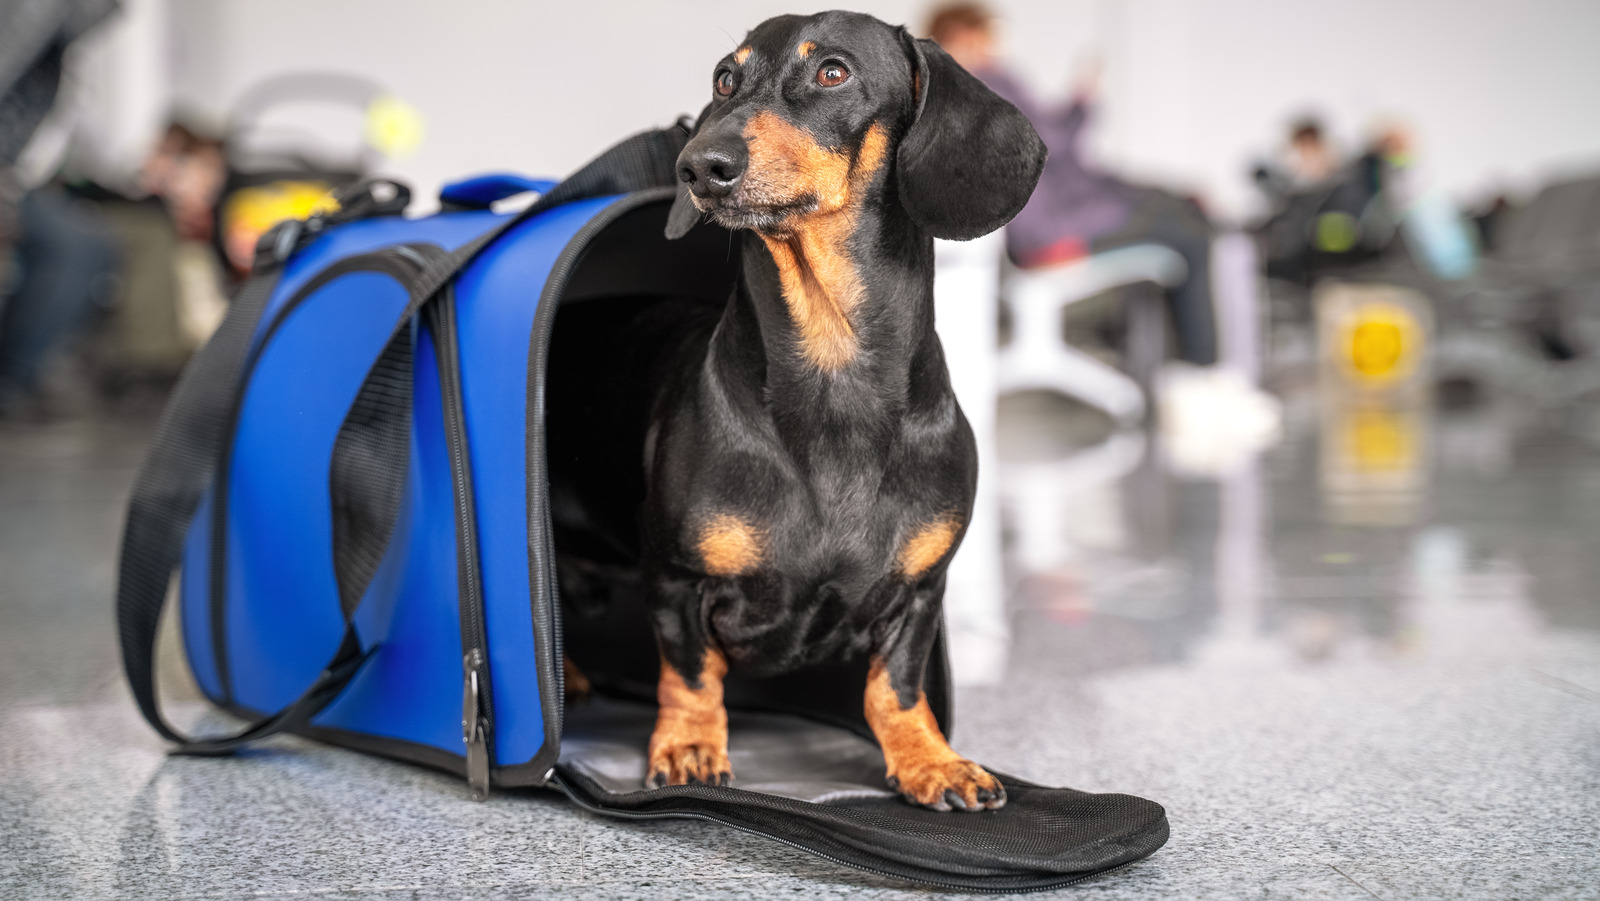 What To Know Before Flying With Your Emotional Support Animal - Explore ...